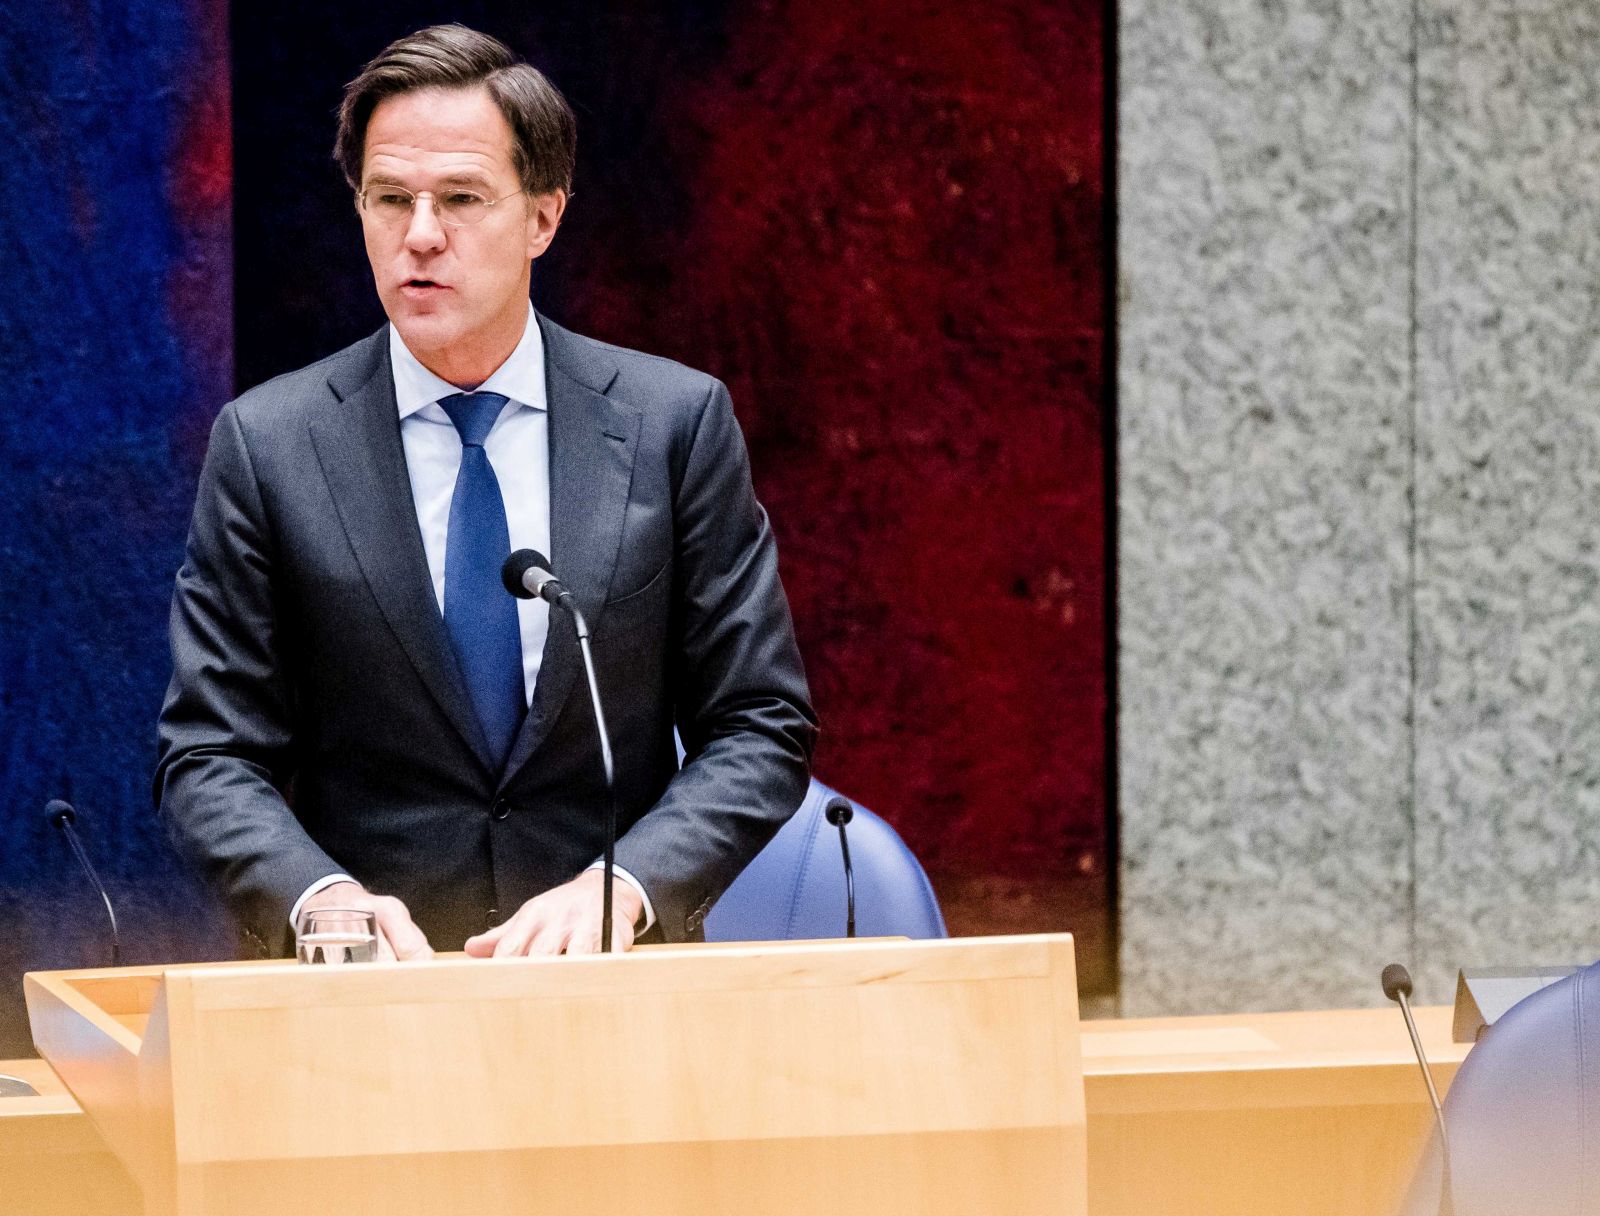 epa08948546 Resigning Dutch Prime Minister Mark Rutte gives a statement in the House of Representatives about the resignation of the Cabinet, in The Hague, the Netherlands, 19 January 2021. The government resigned because of the harsh report on the benefits affair.  EPA/BART MAAT